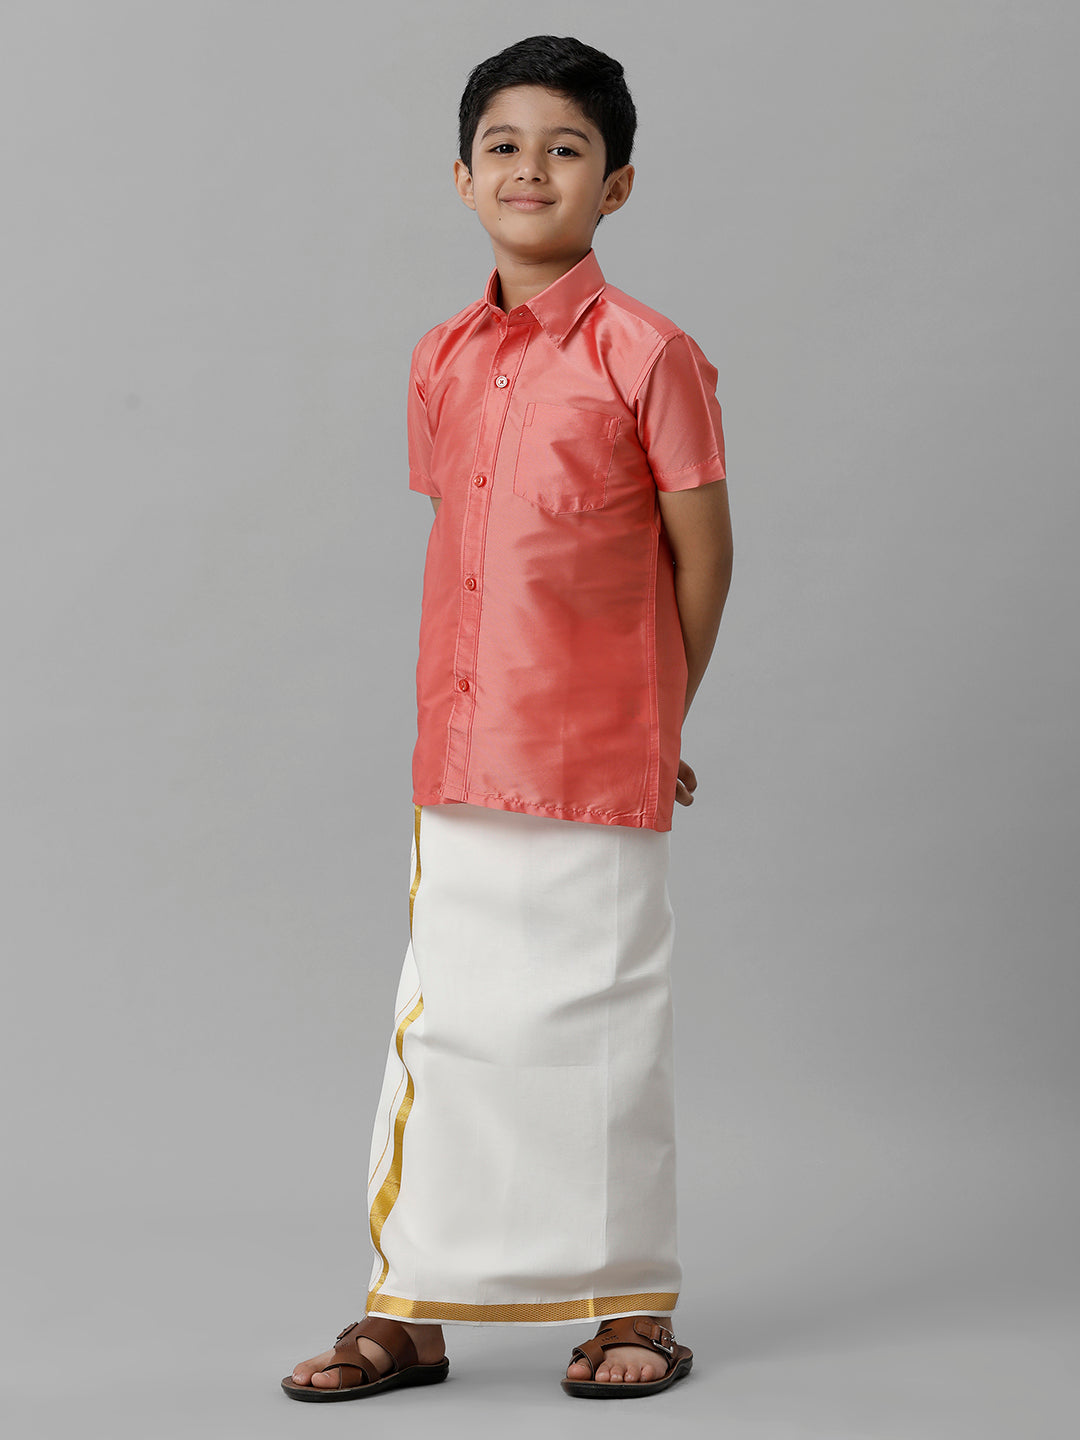 Boys Silk Cotton Pink Half Sleeves Shirt with Adjustable Cream Dhoti Combo K45-Front view